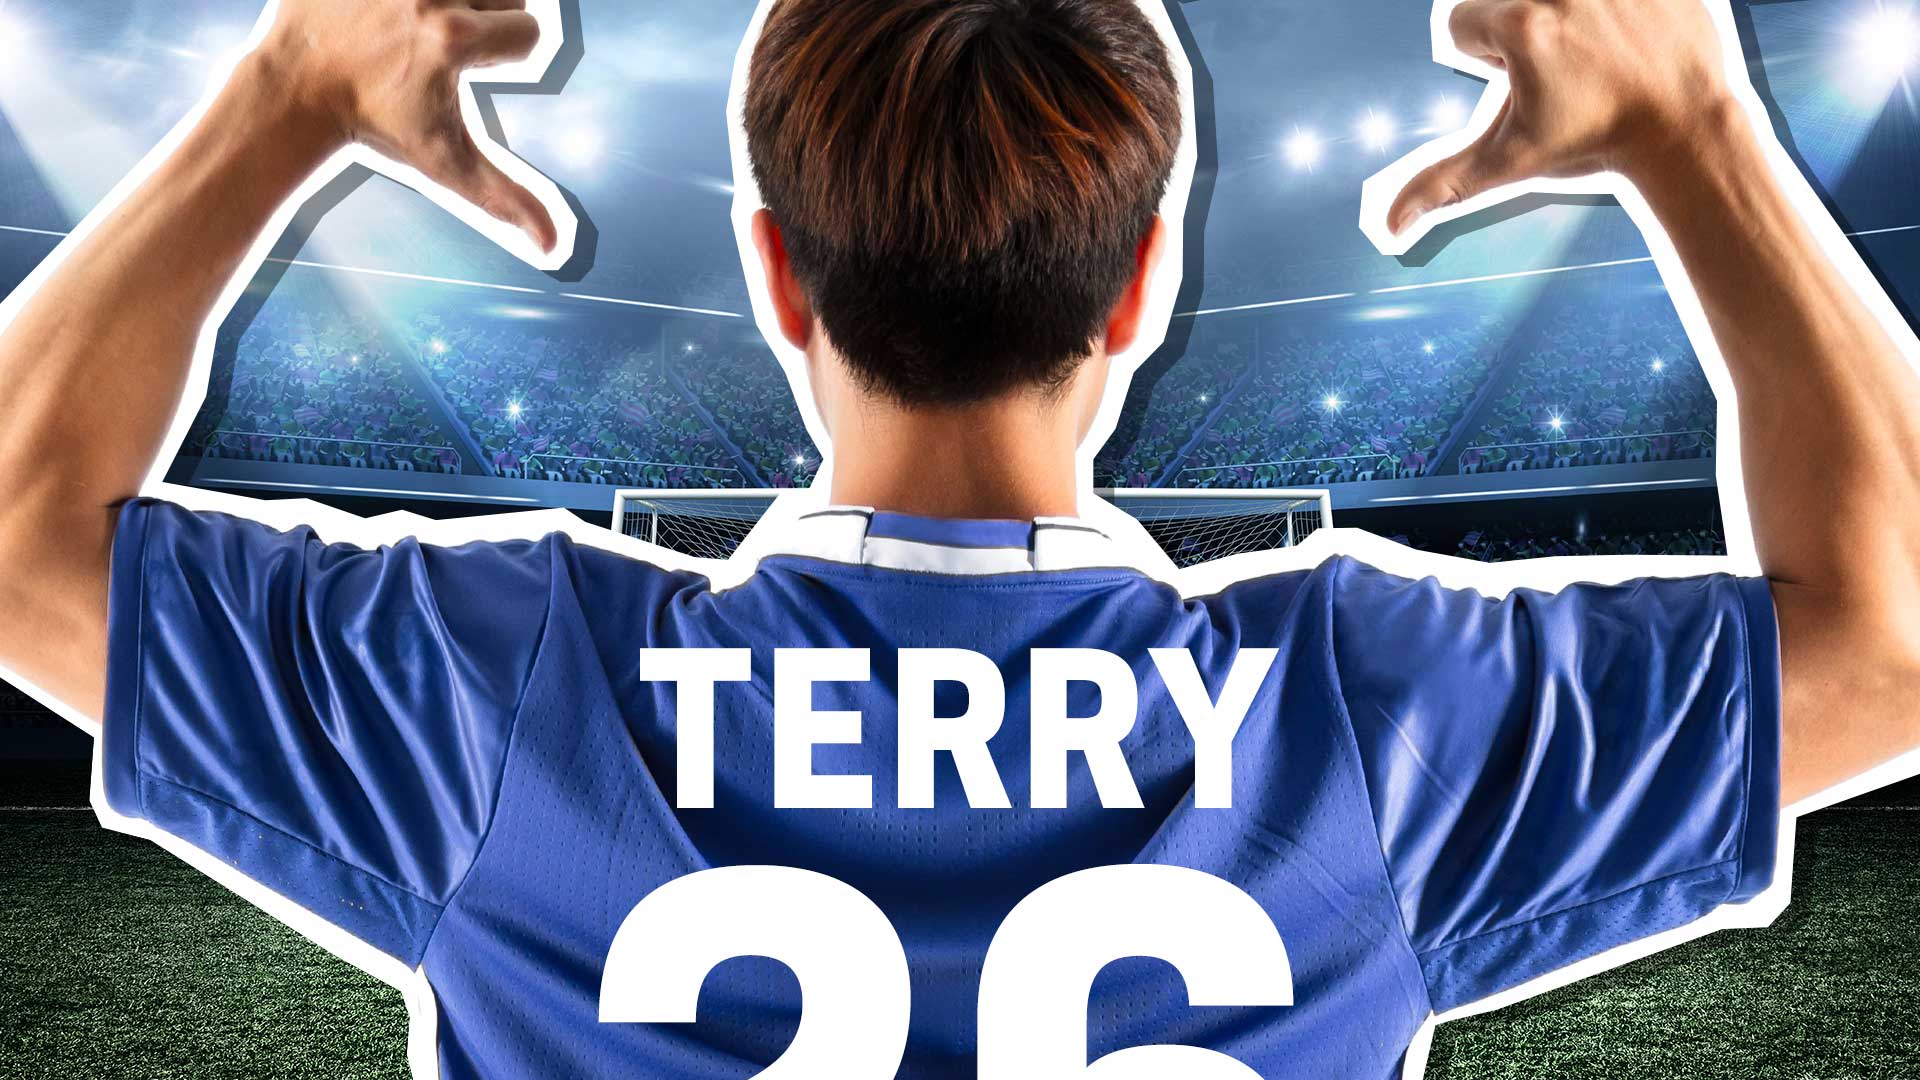 A football plaiter with Terry across the back of their shirt